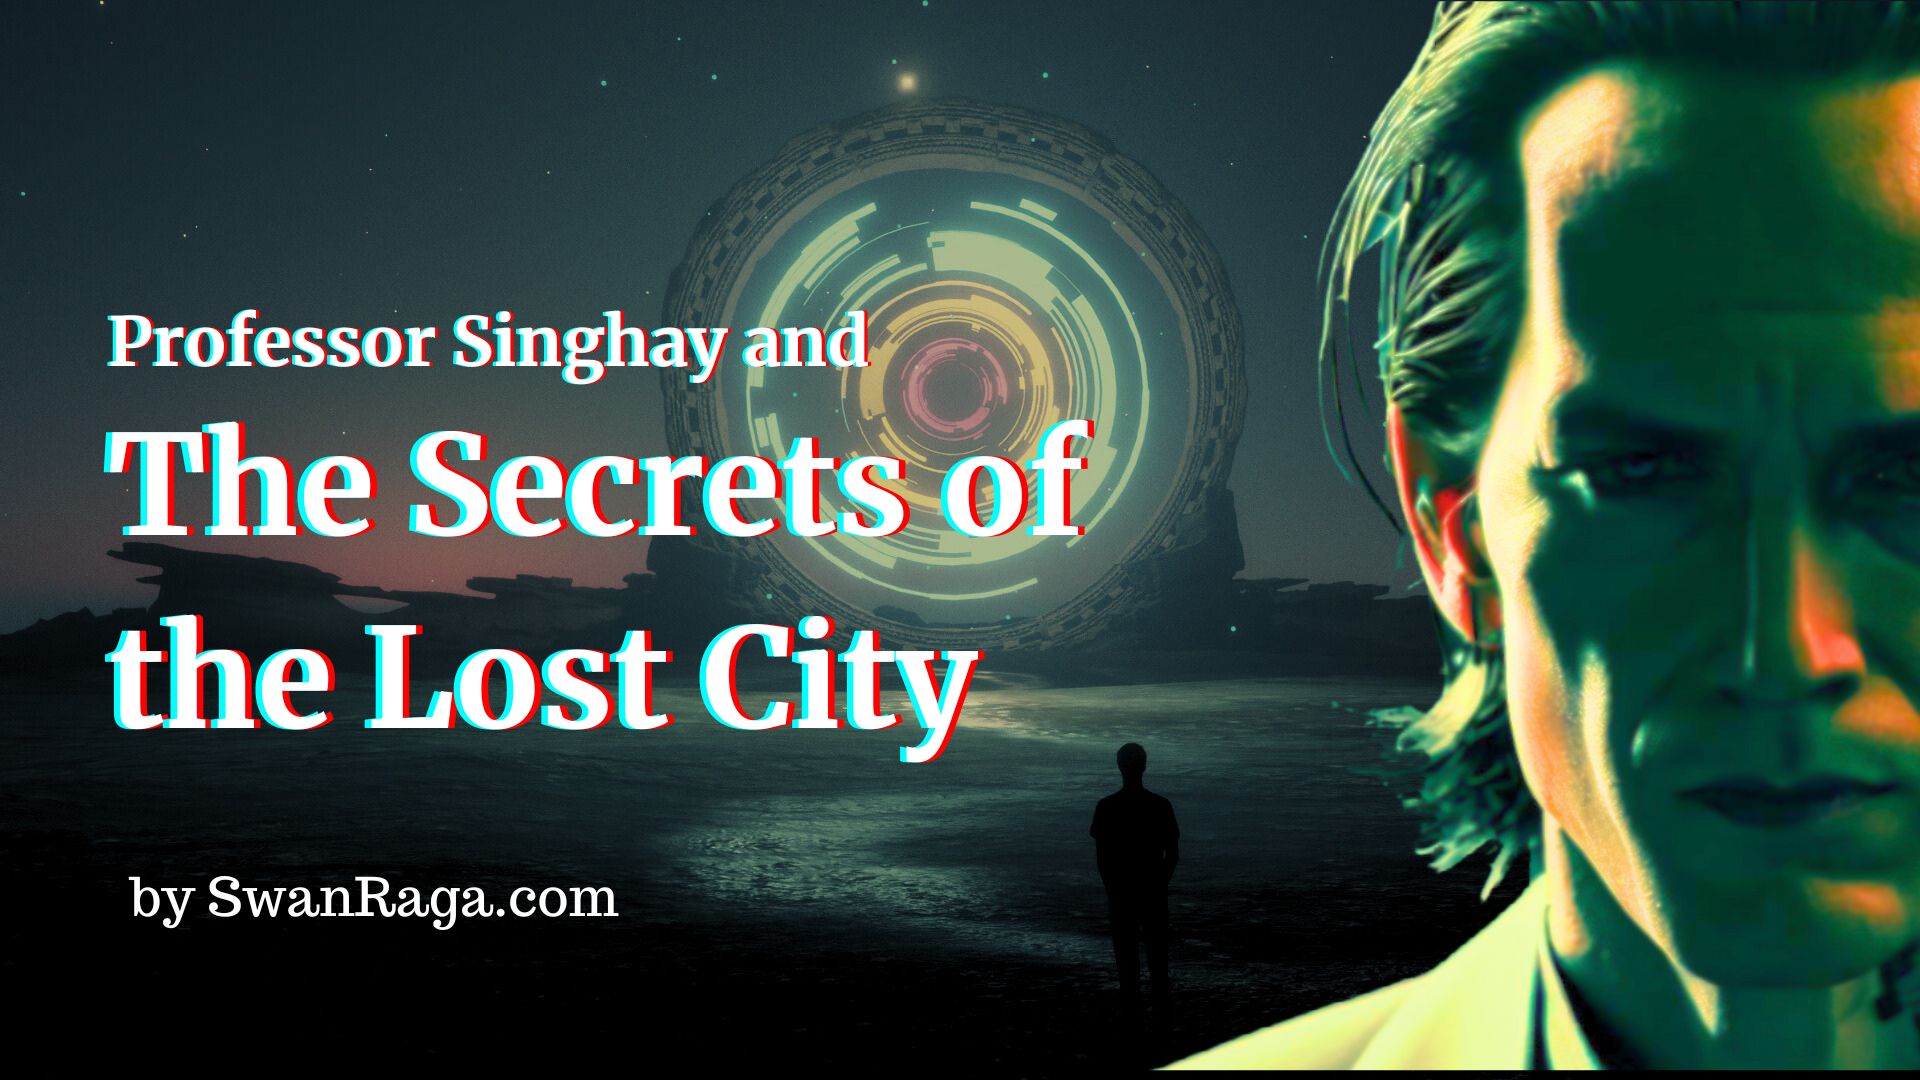 Bedtime Story: Professor Singhay and the Secrets of the Lost City